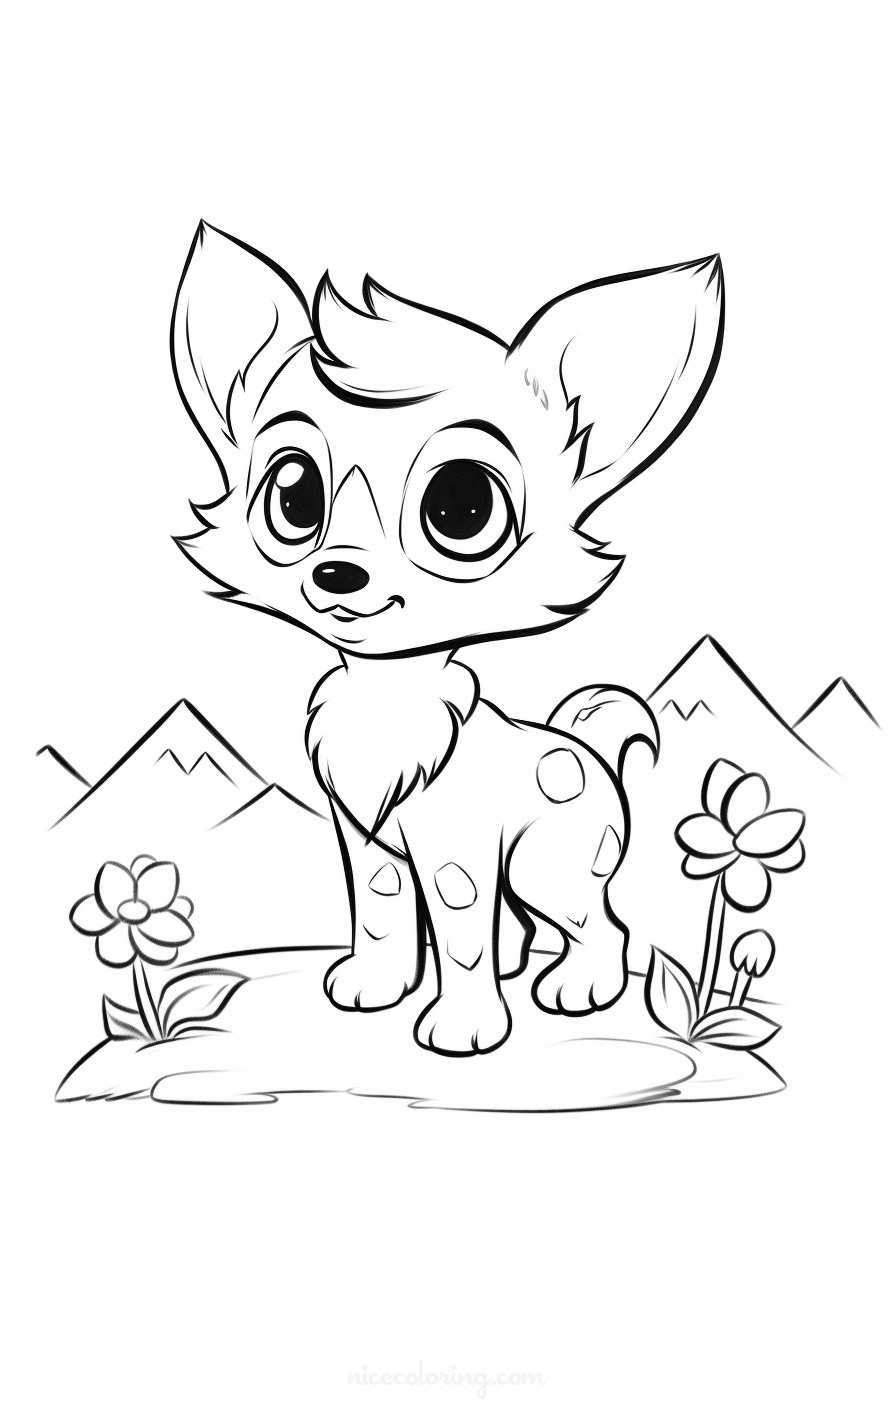 Wolf in a serene forest setting coloring page